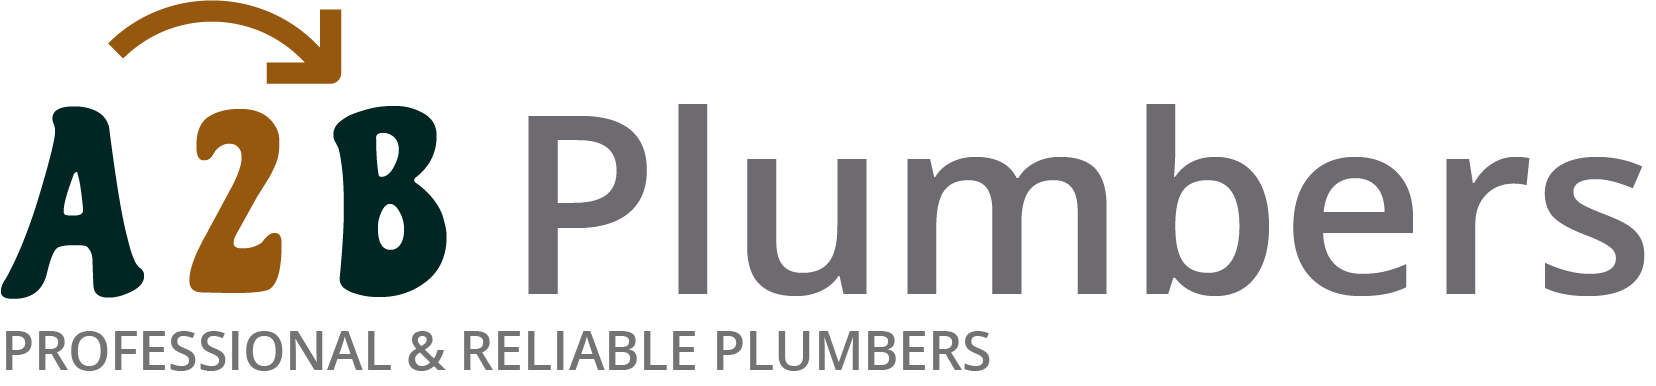 If you need a boiler installed, a radiator repaired or a leaking tap fixed, call us now - we provide services for properties in Elm Park and the local area.